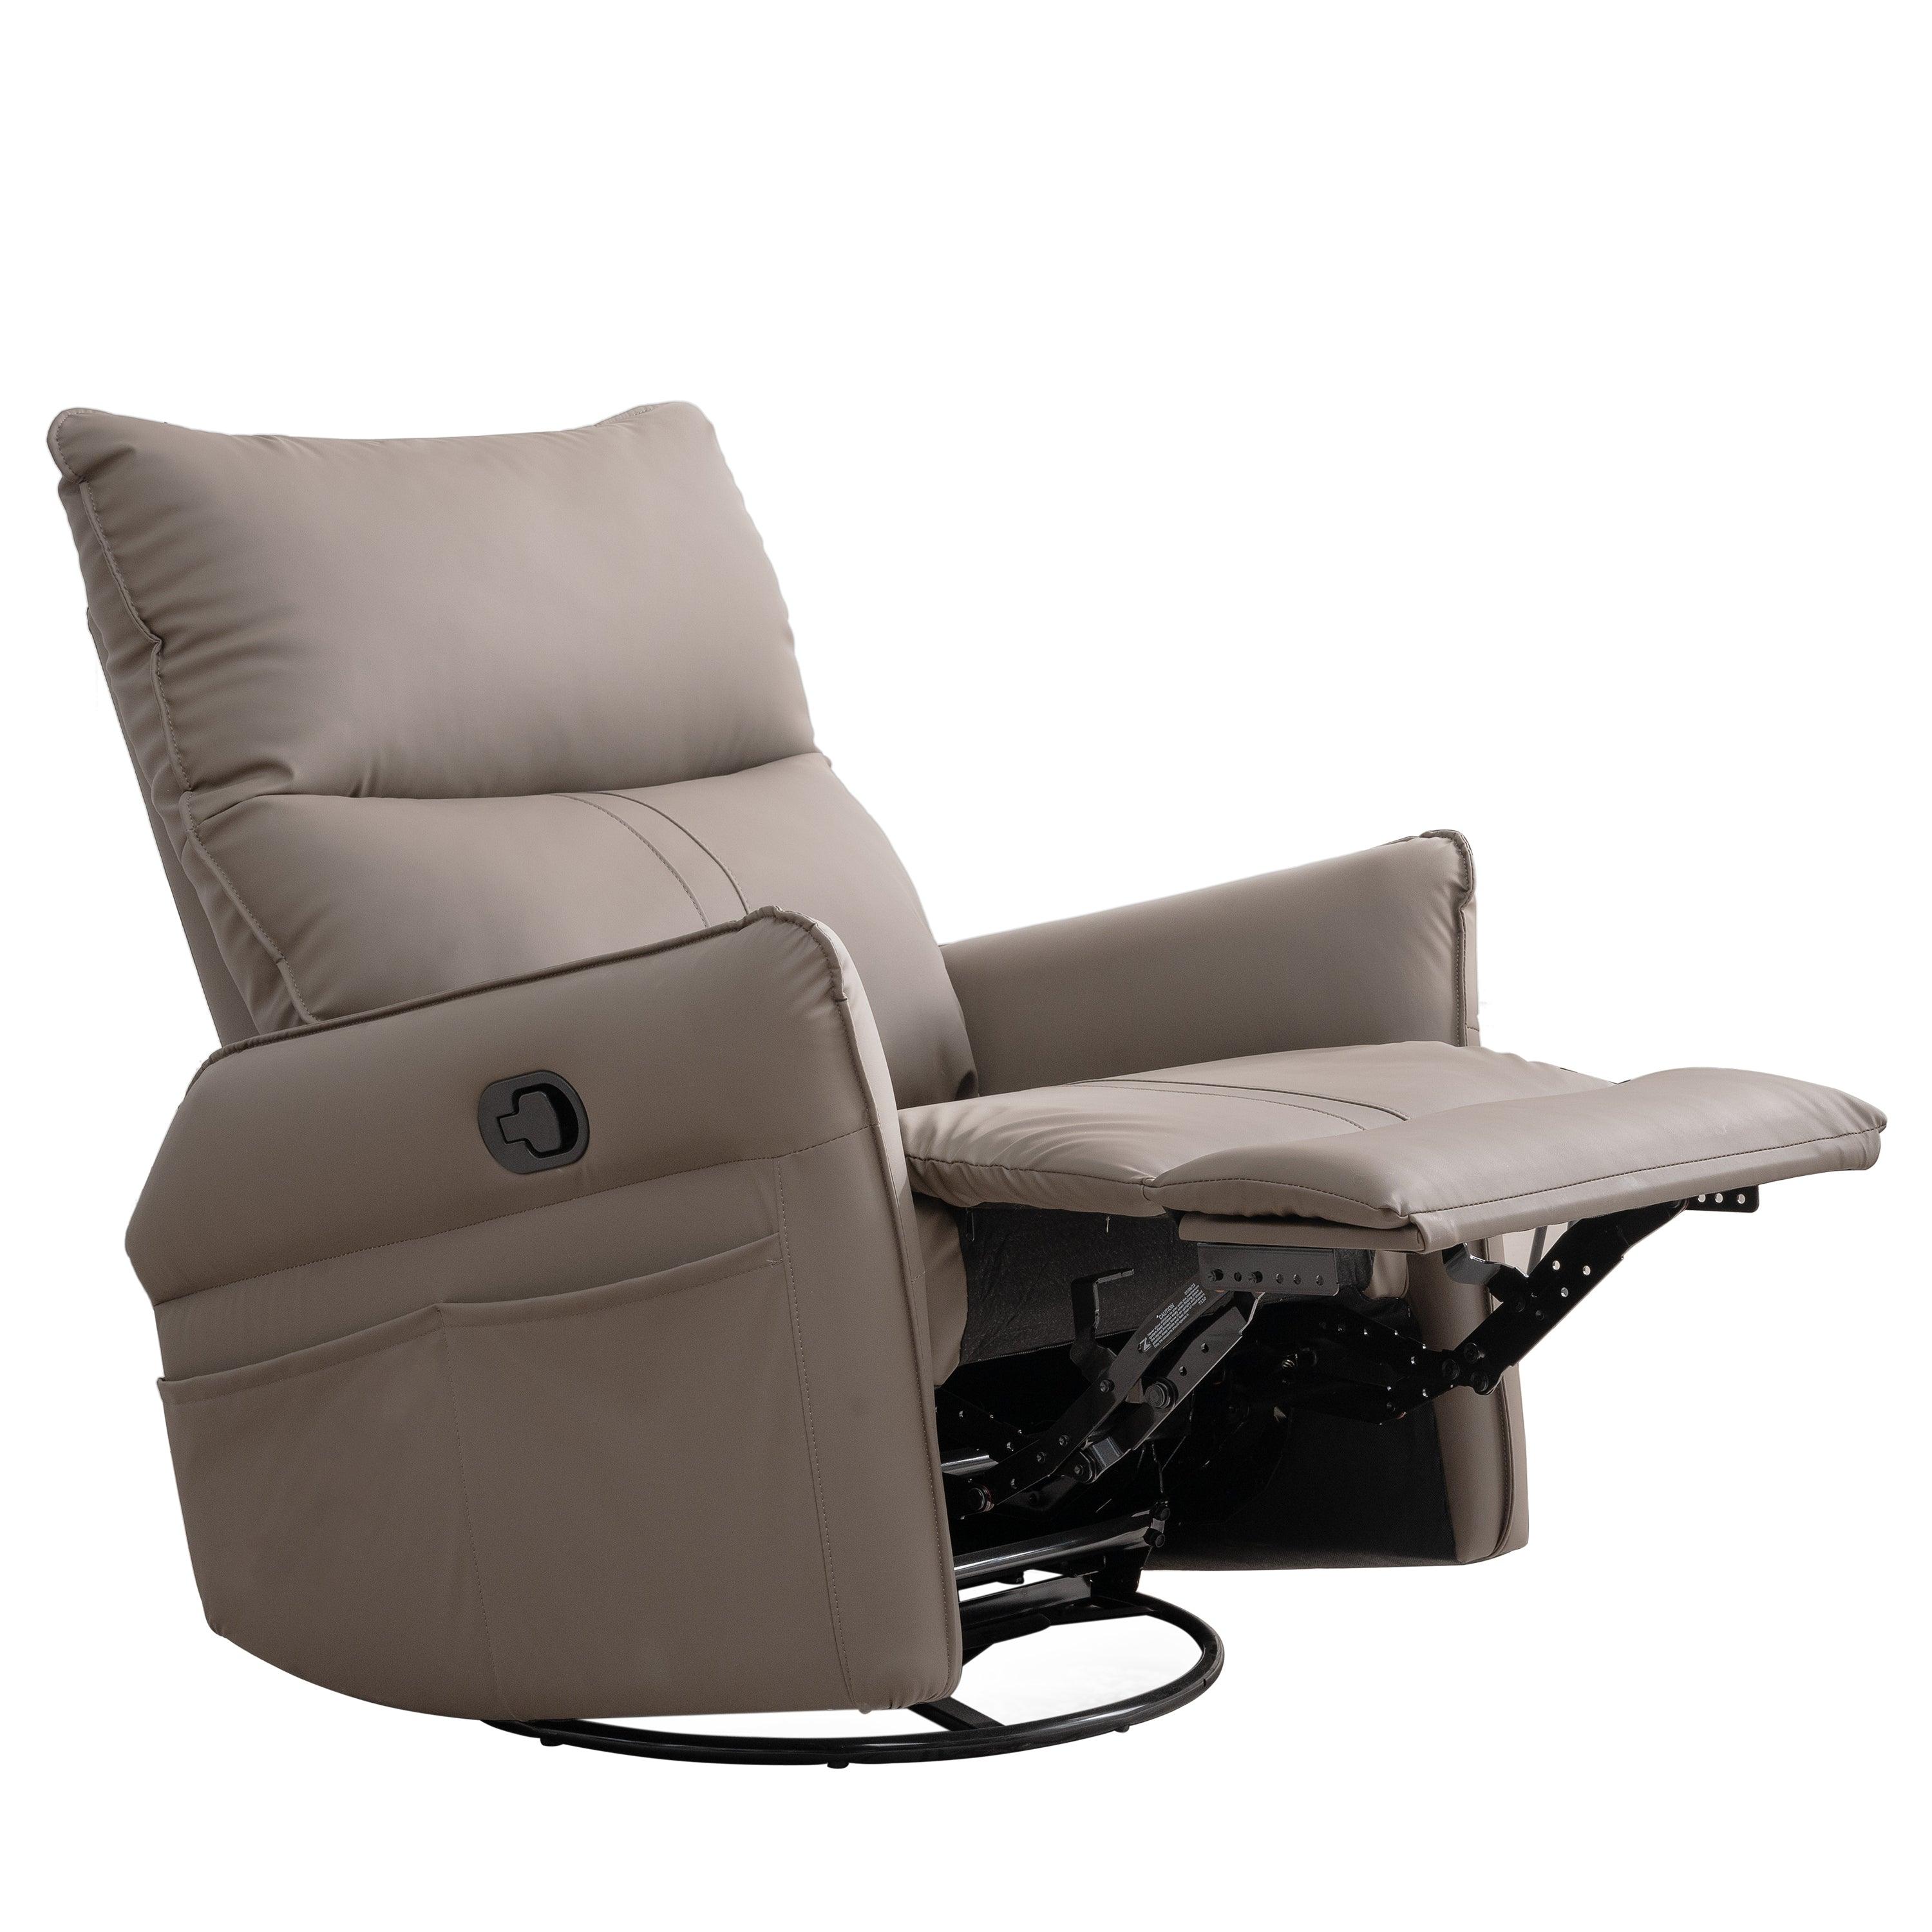 3-In-1 Swiveling, Rocking & Reclining Recliner Chair - Brown LamCham